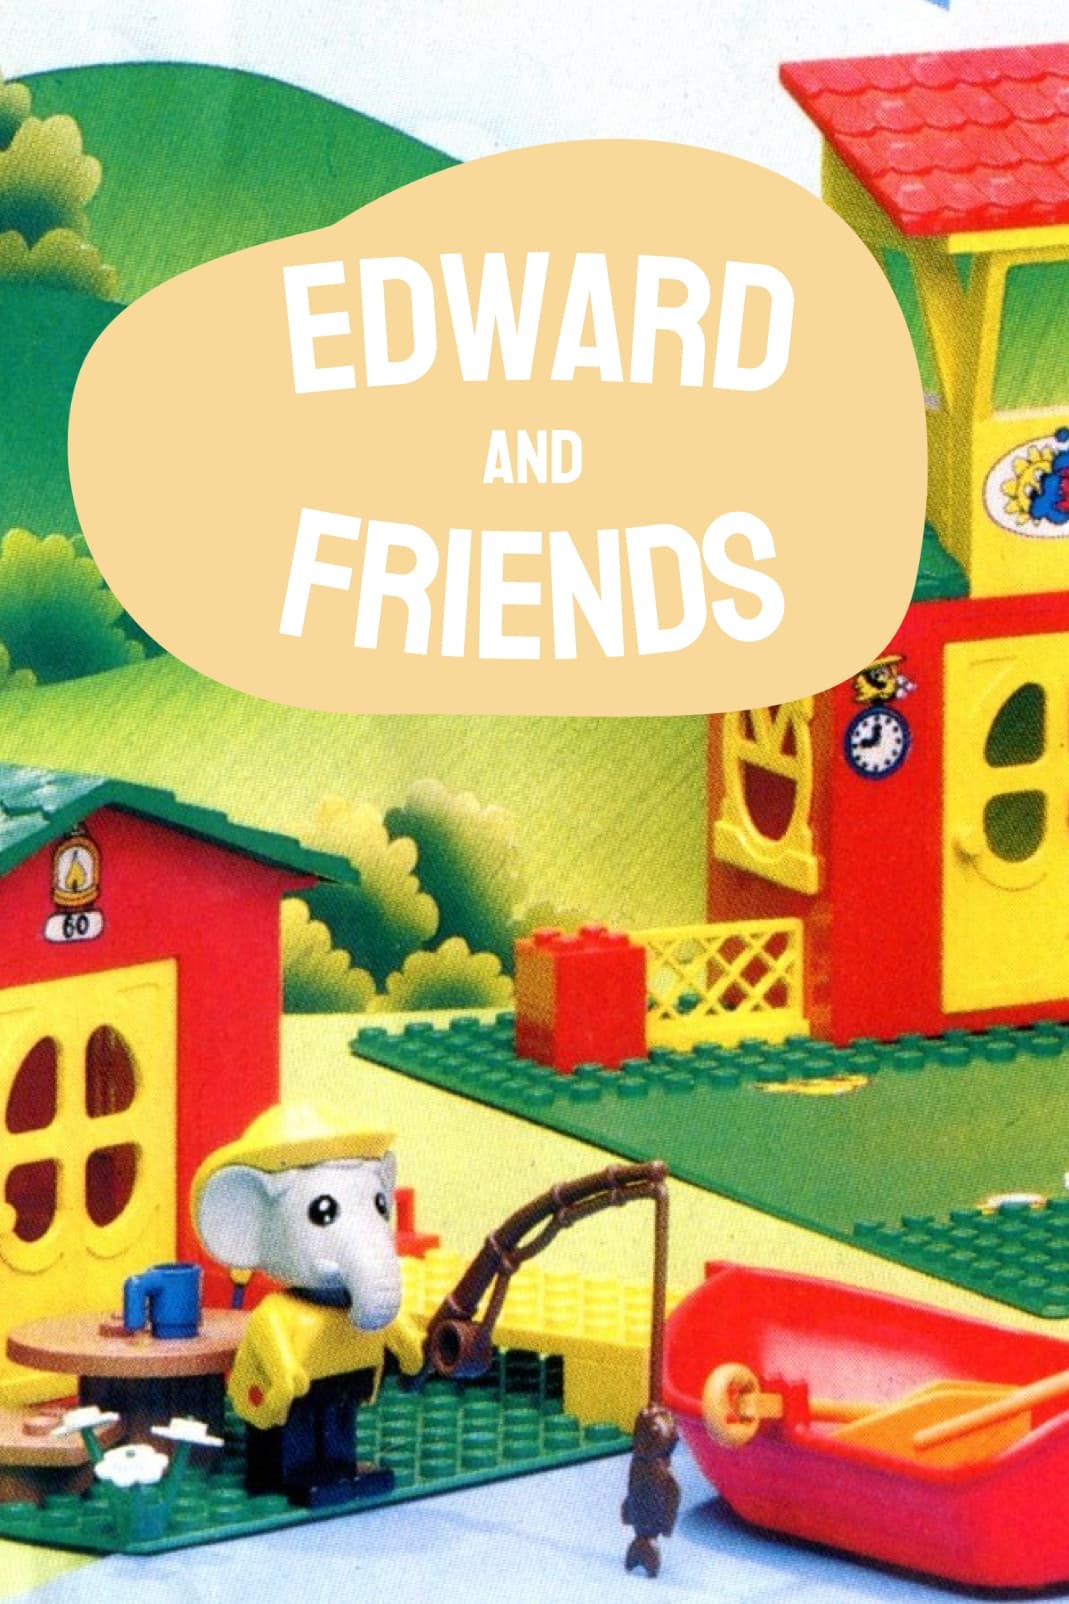 Edward and Friends